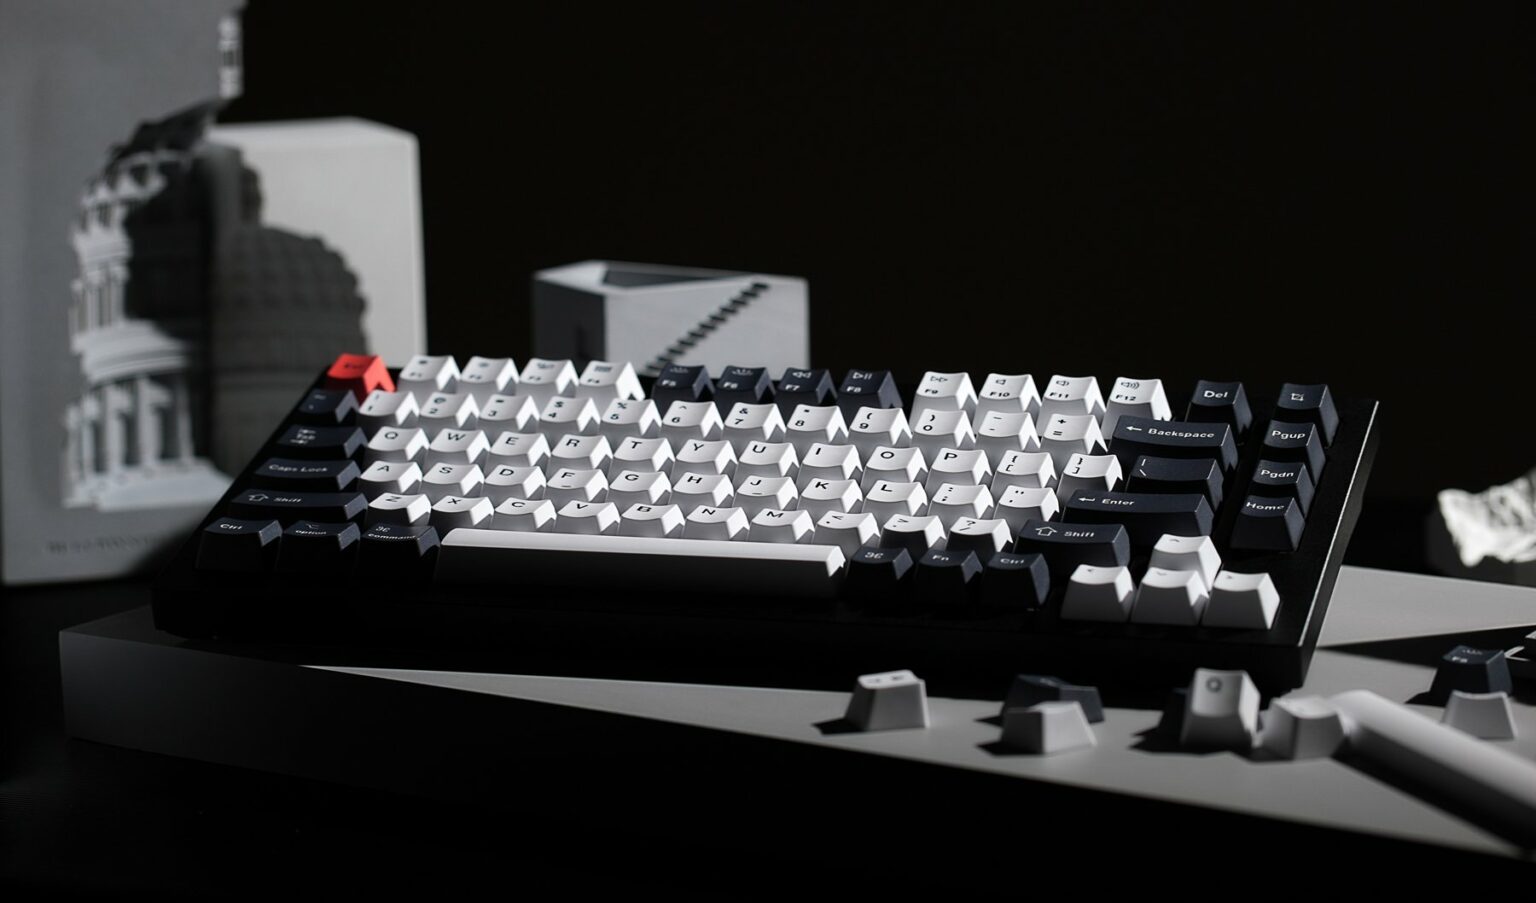 Even a beginner can customize the new Keychron Q1 mechanical keyboard.